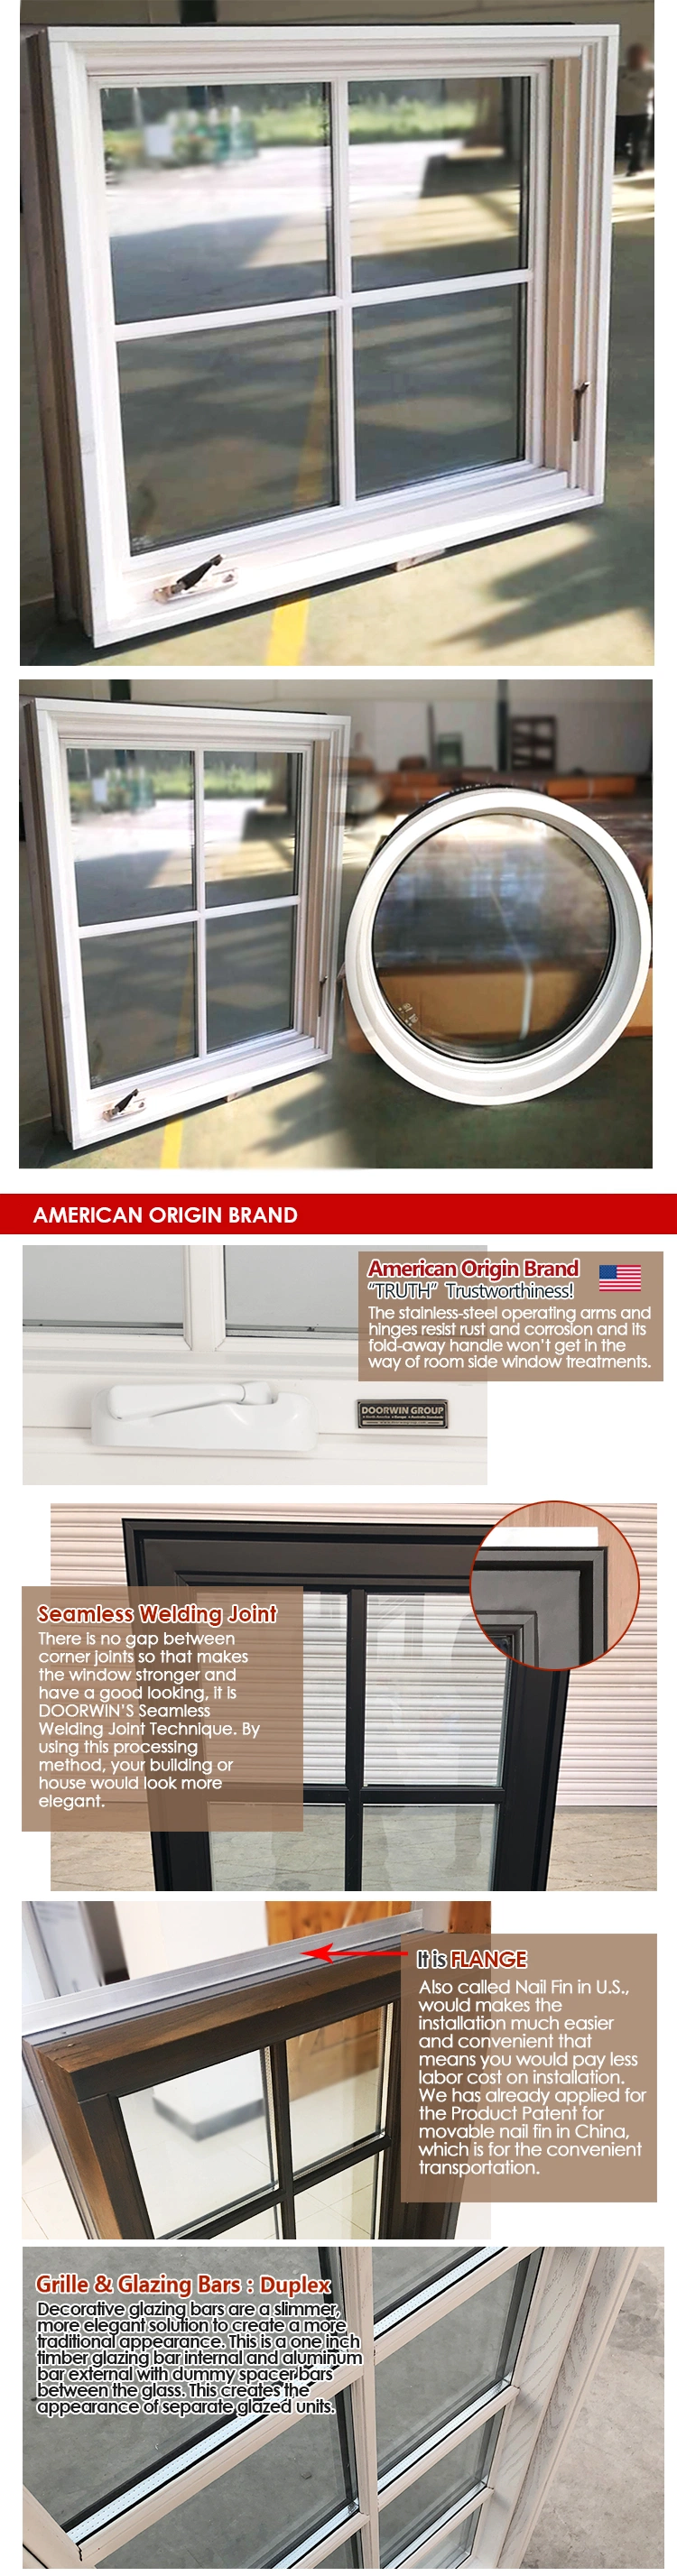 ISO9001 Certified Aluminum Clad Wood Windows with Grill for Sale in-Swing Windows Dual Action Double Casement Window